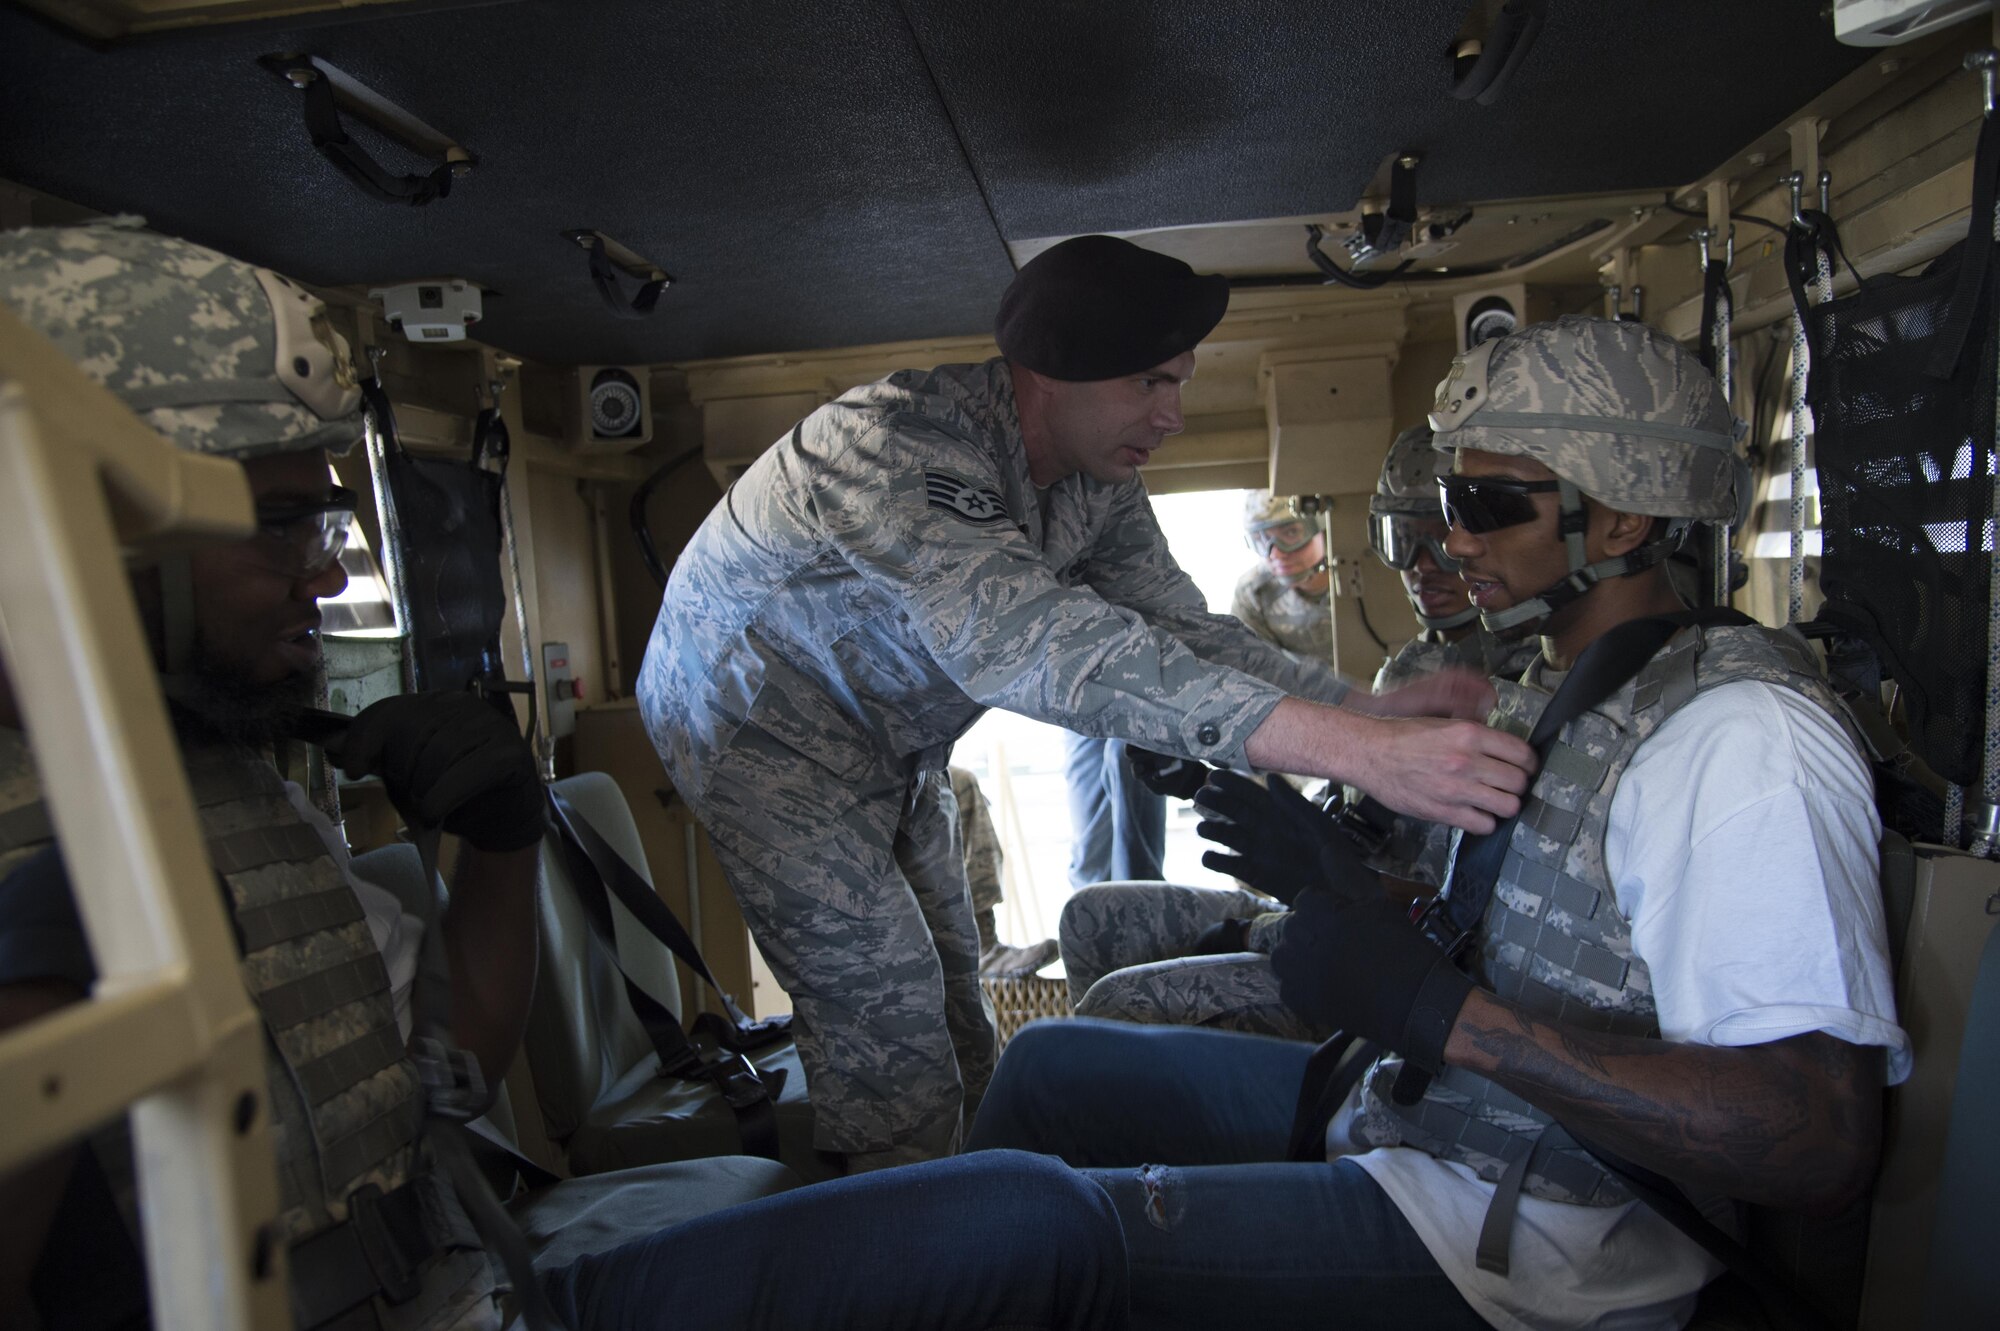 Staff Sgt. Kevin Weier, 820th Combat Operations Squadron, checks the seatbelt of Malcolm Mitchell, New England Patriots’ wide receiver and Super Bowl LI Champion, prior to a rollover demonstration in the Mine-Resistant Ambush-Protected Egress Trainer during a visit March 7, 2017, at Moody Air Force Base, Ga. Mitchell, a Valdosta native, got a glimpse of a typical day in the life of Moody Airmen. Mitchell also spent time with Airmen and signed autographs for local Patriots’ fans during his visit. (U.S. Air Force photo by Andrea Jenkins)